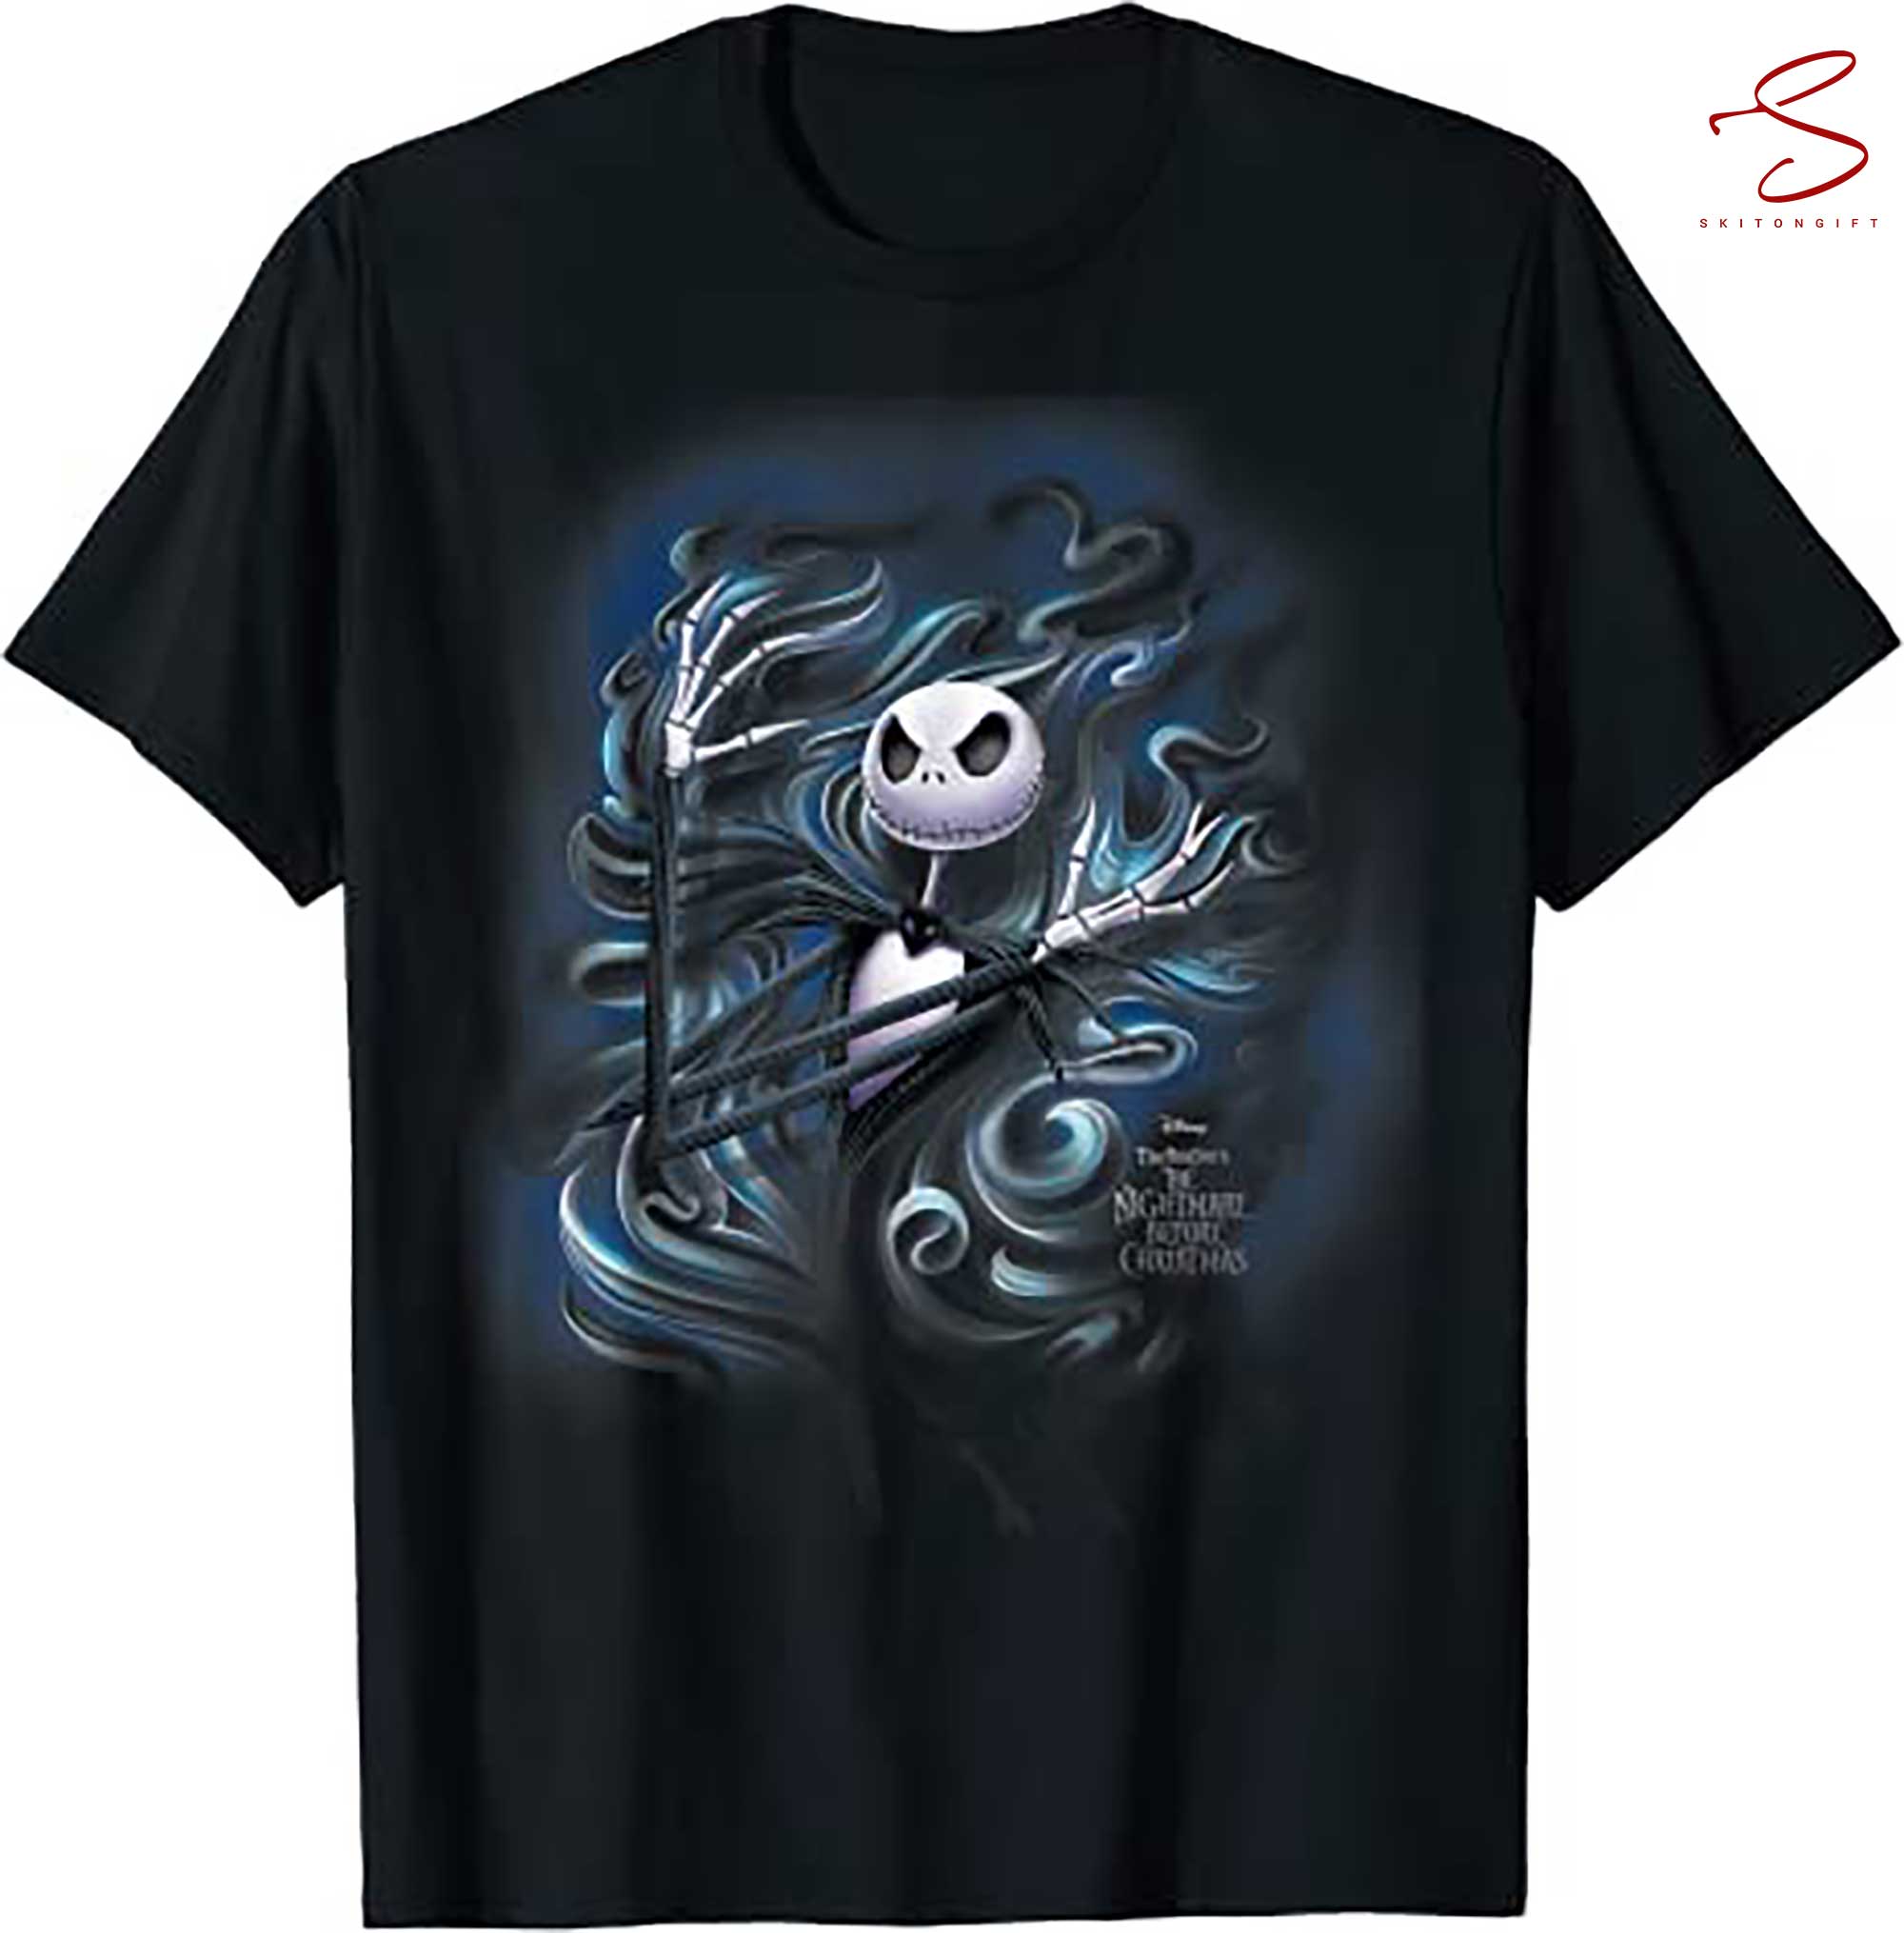 Skitongift Jack Fog Skeleton T Shirt, Halloween T Shirt, Spooky T Shirt, gifts for Dad Mom,Gifts for Him, Her, Gifts for Dad Mom